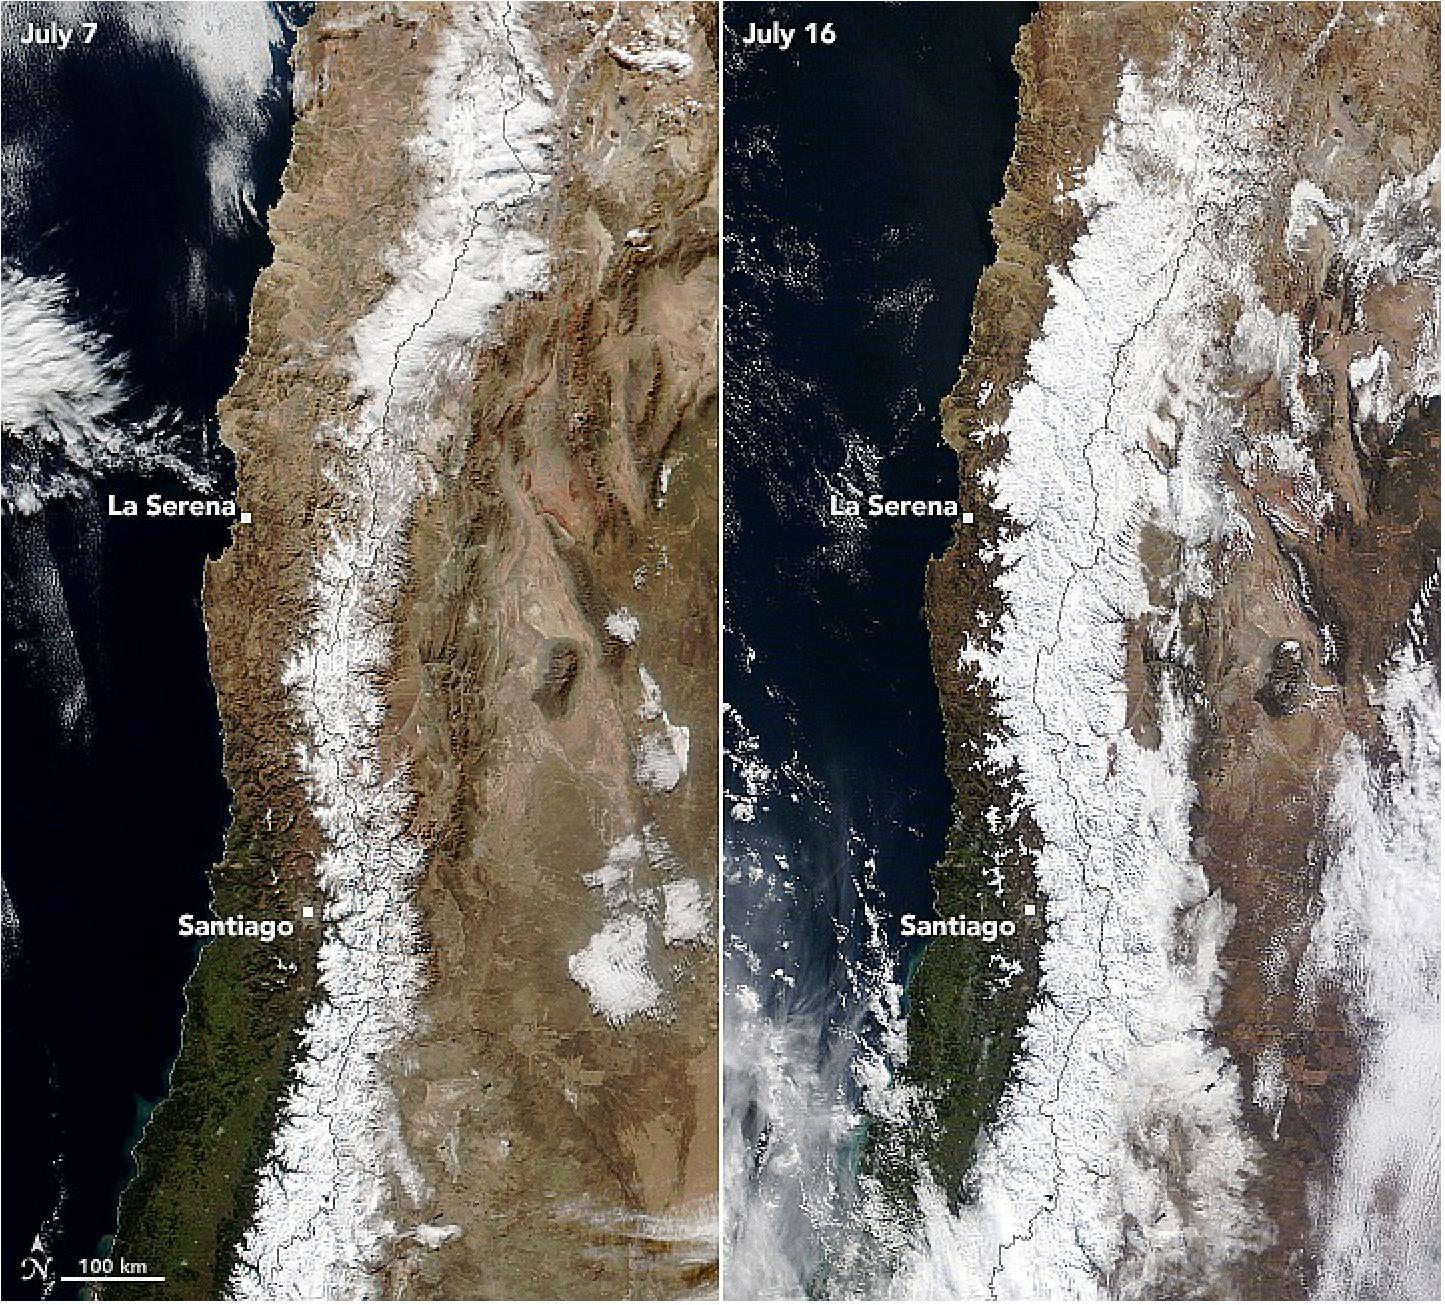 Figure 9: Back-to-back weather systems in July 2022 eased rainfall deficits in central Chile and added to the snowpack atop the mountain range. “Until 10 days ago, north-central Chile was experiencing one of its driest winters,” said René Garreaud, a scientist at the University of Chile. The change from dry to wet was swift and visibly striking. The Visible Infrared Imaging Radiometer Suite (VIIRS) on the NOAA-20 satellite acquired a view of the same area on July 7 (left), just prior to the storms. Notice the relatively sparse snow cover compared with the July 16 image (right) acquired after the storms (image credit: NASA Earth Observatory)